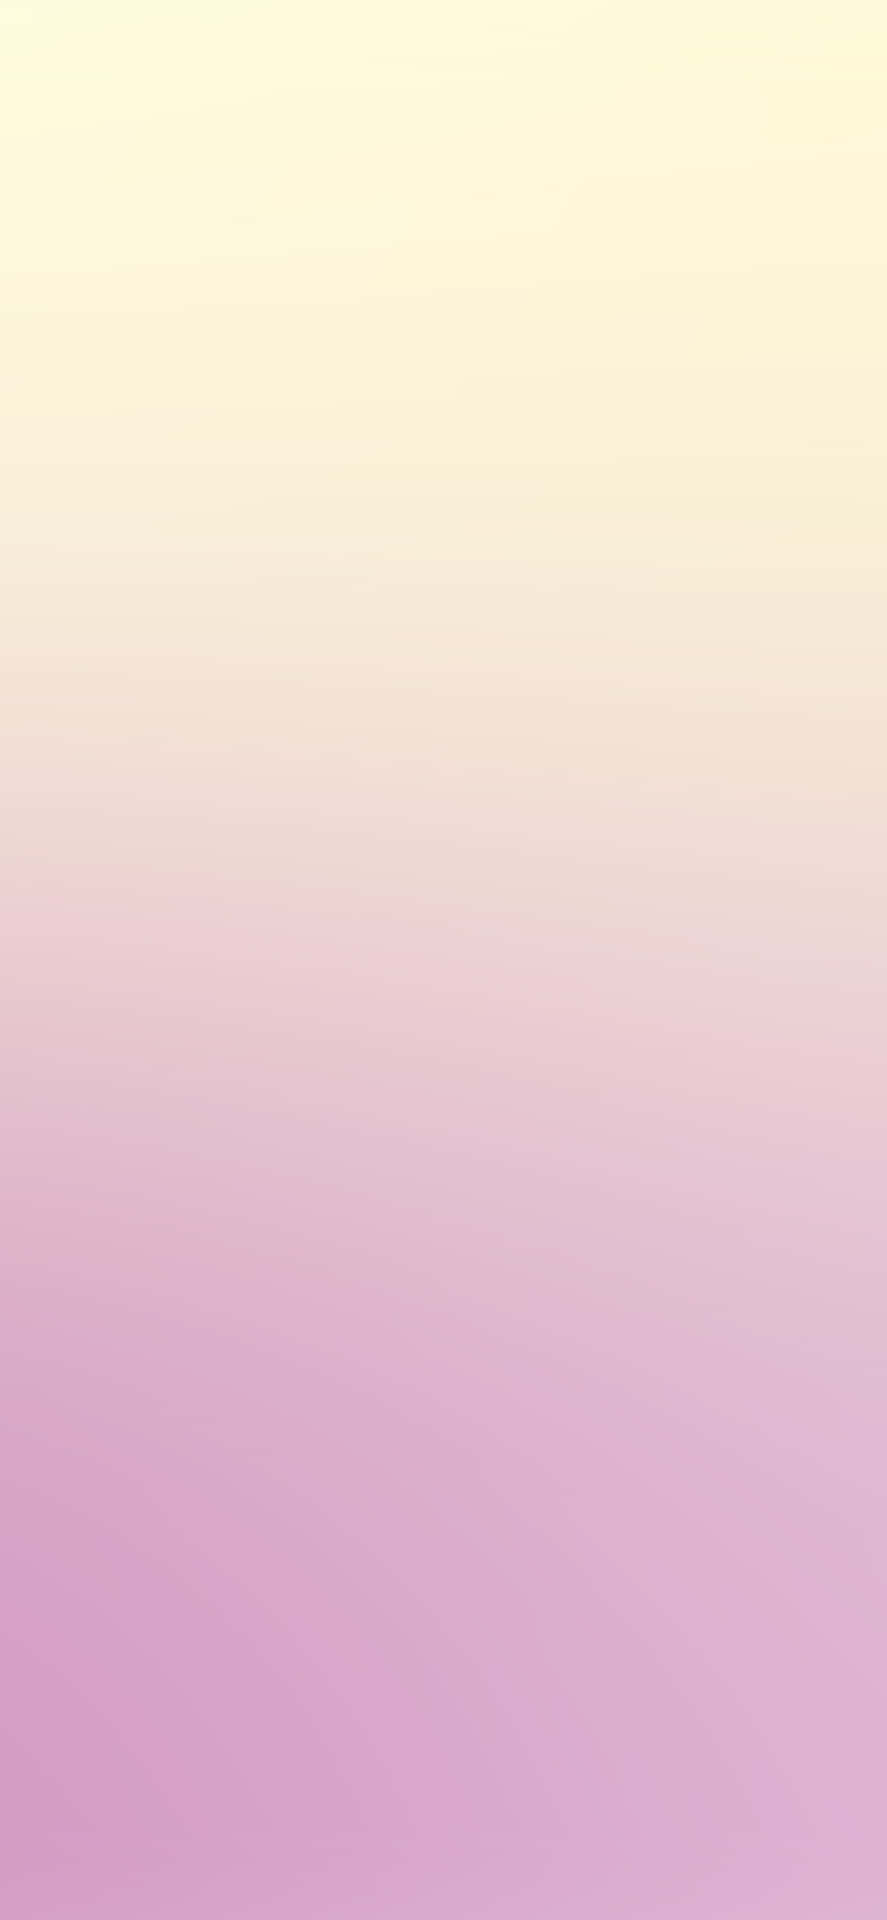 Soft, lovely pastel ombre look Wallpaper